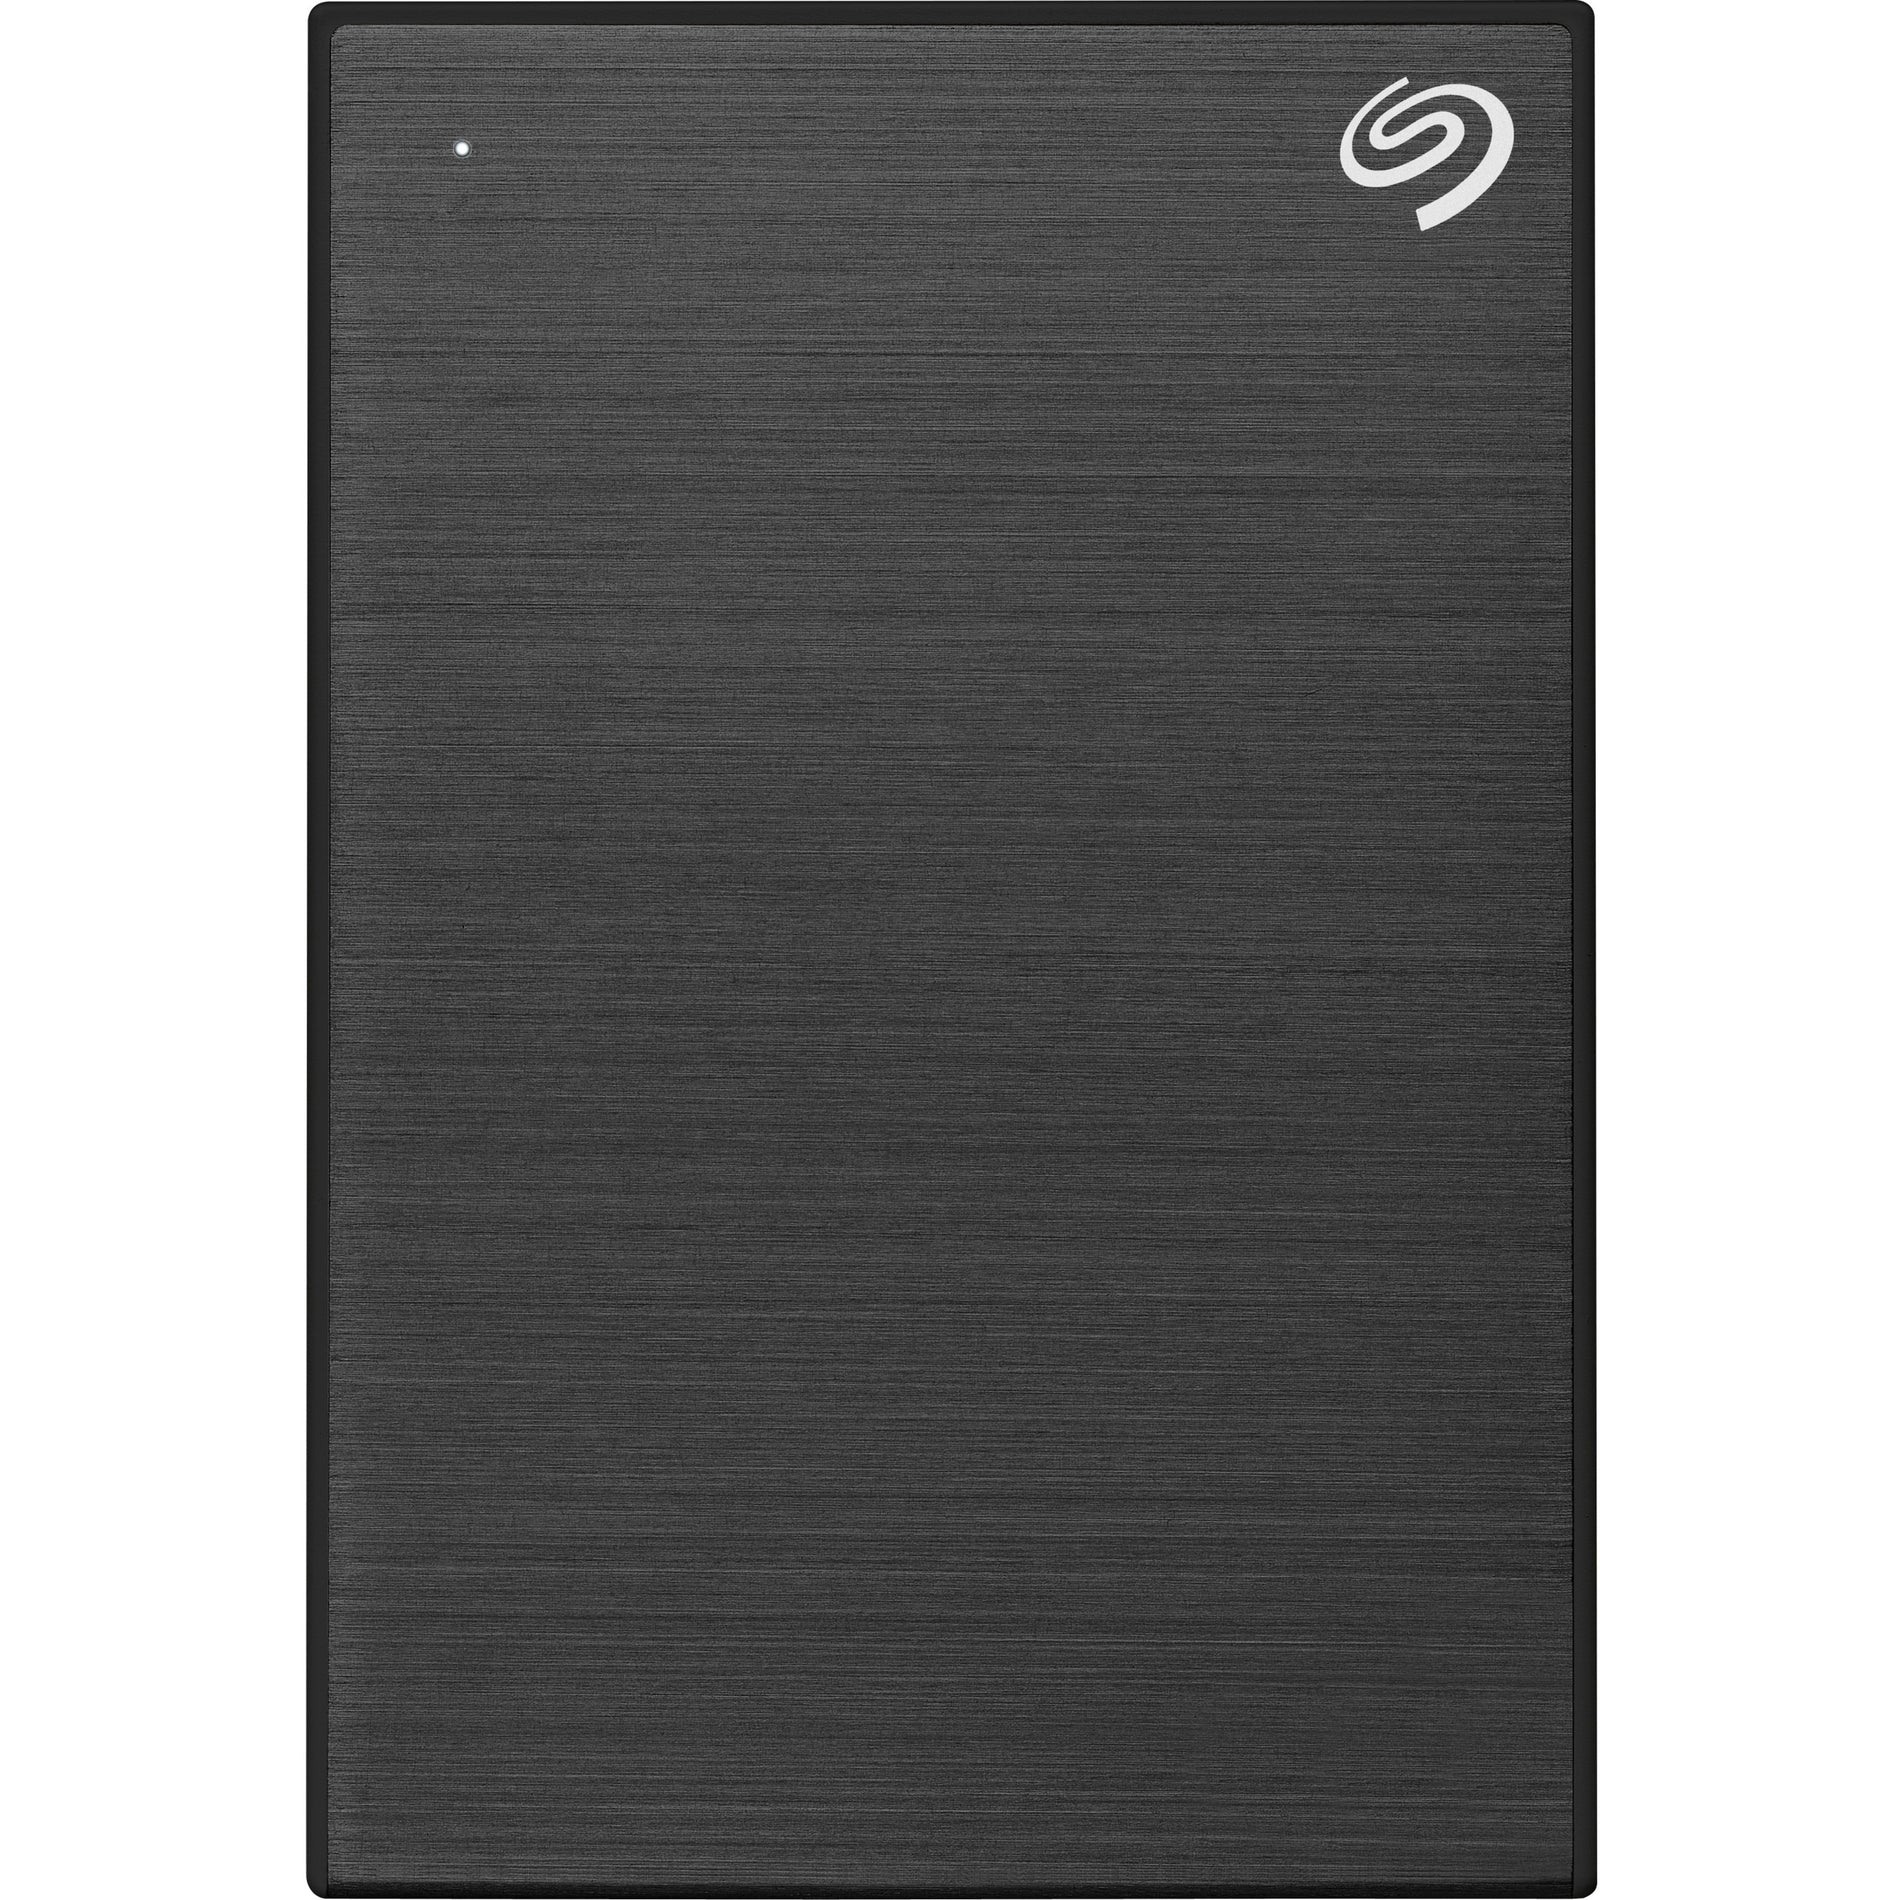 Seagate STKY2000400 One Touch Portable Storage, 2TB HDD with Password Protection, USB 3.0